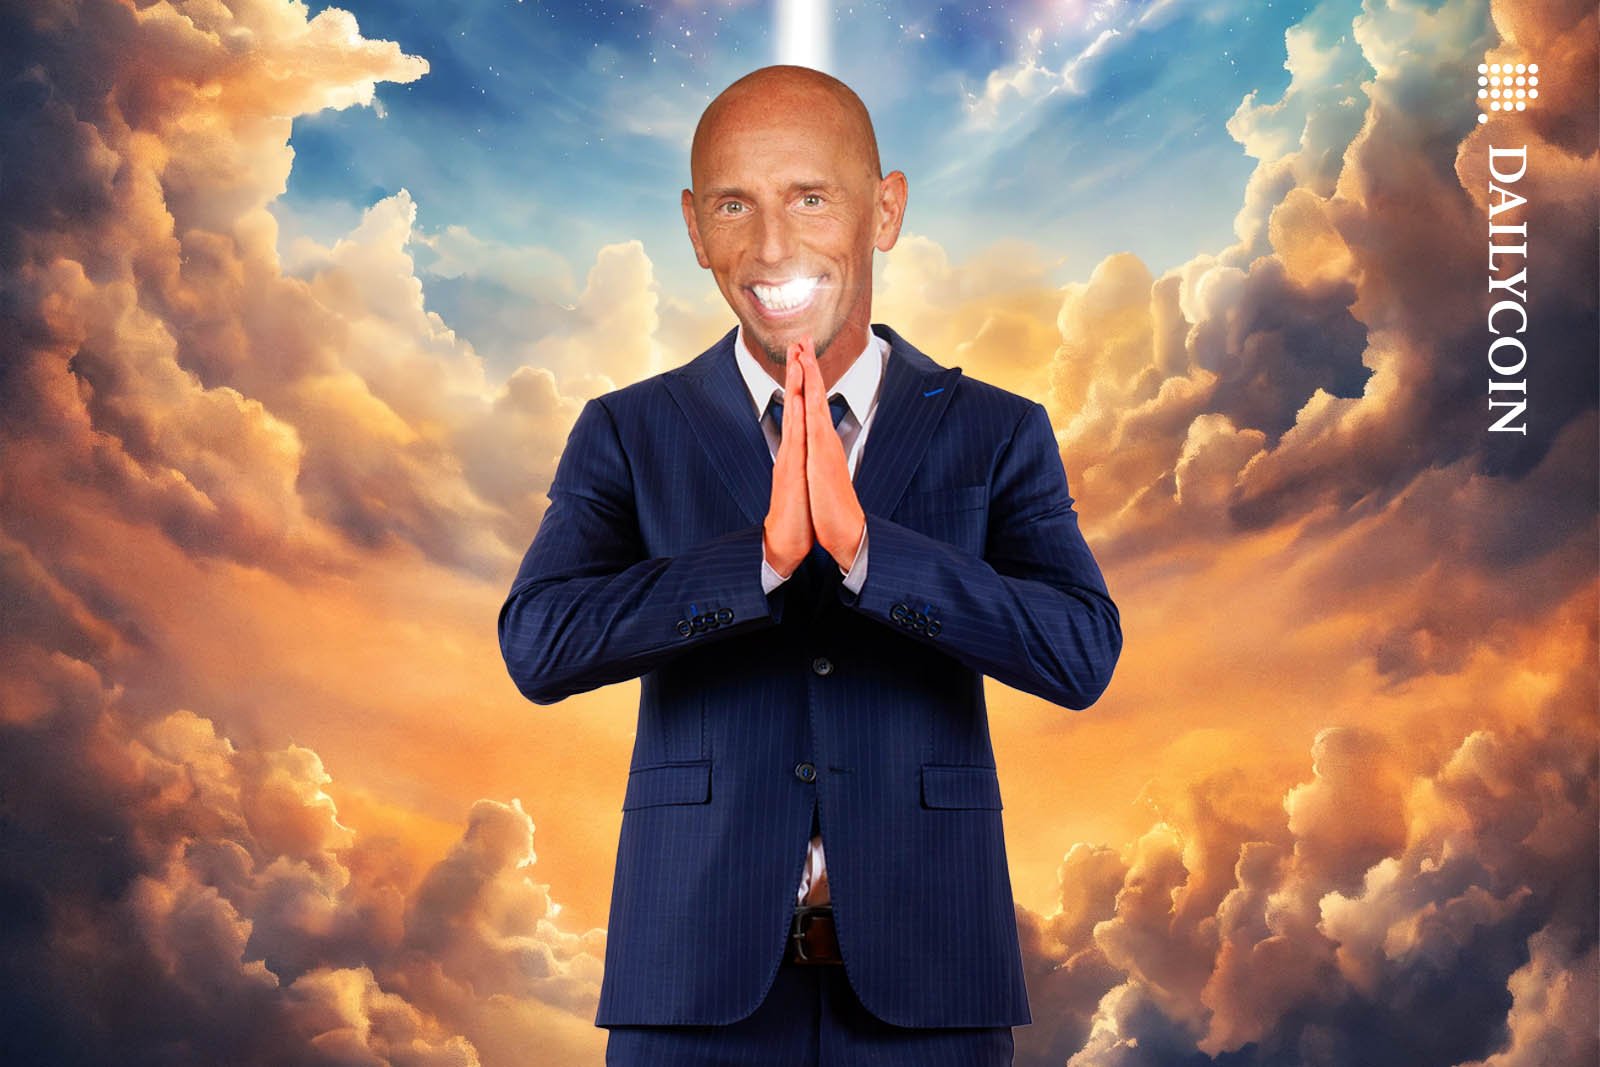 Marc Mukasey puts his hands for a prayer infront of a heavenly background.